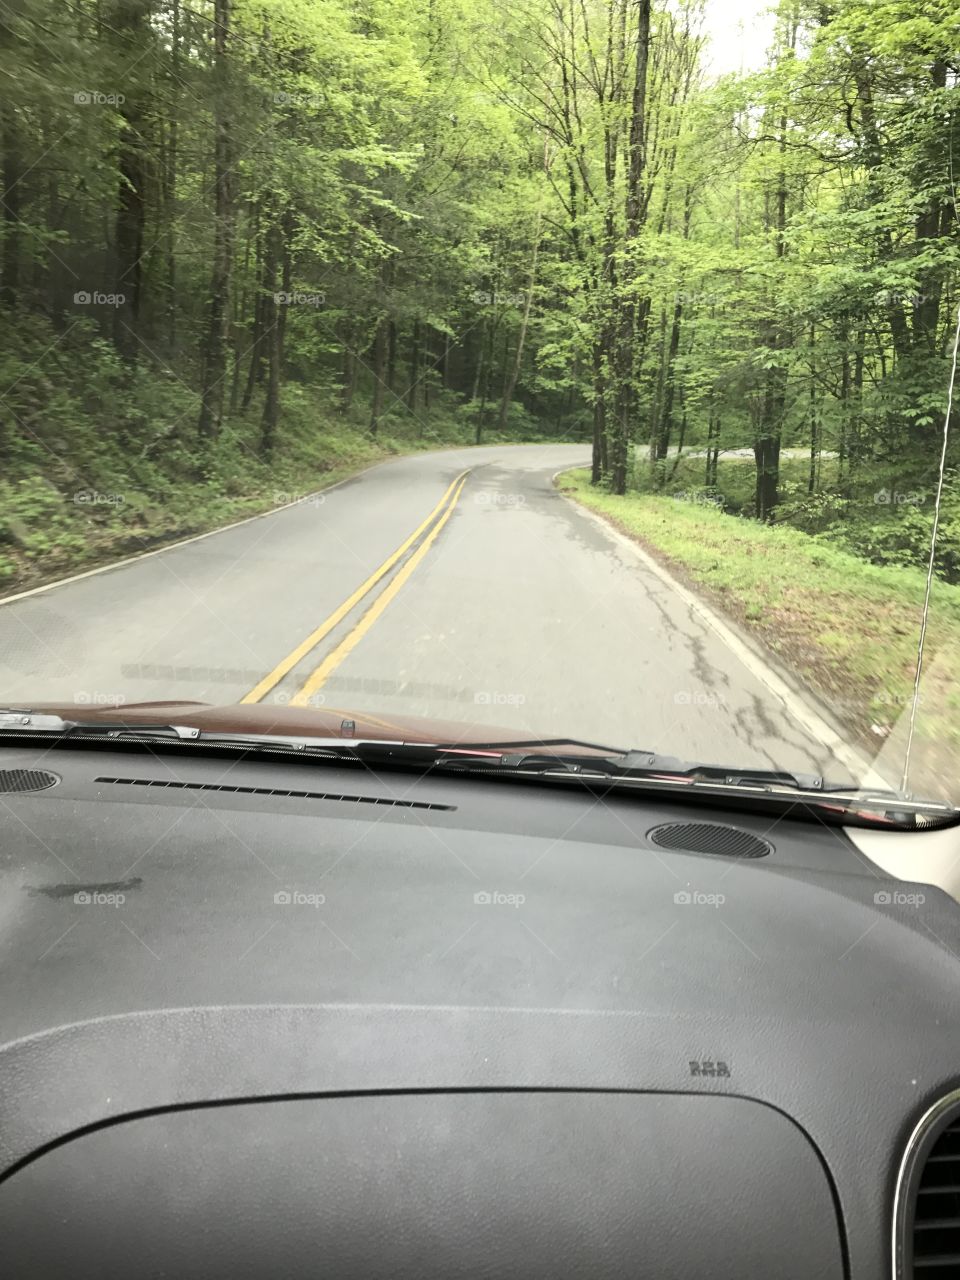 Tennessee back roads.